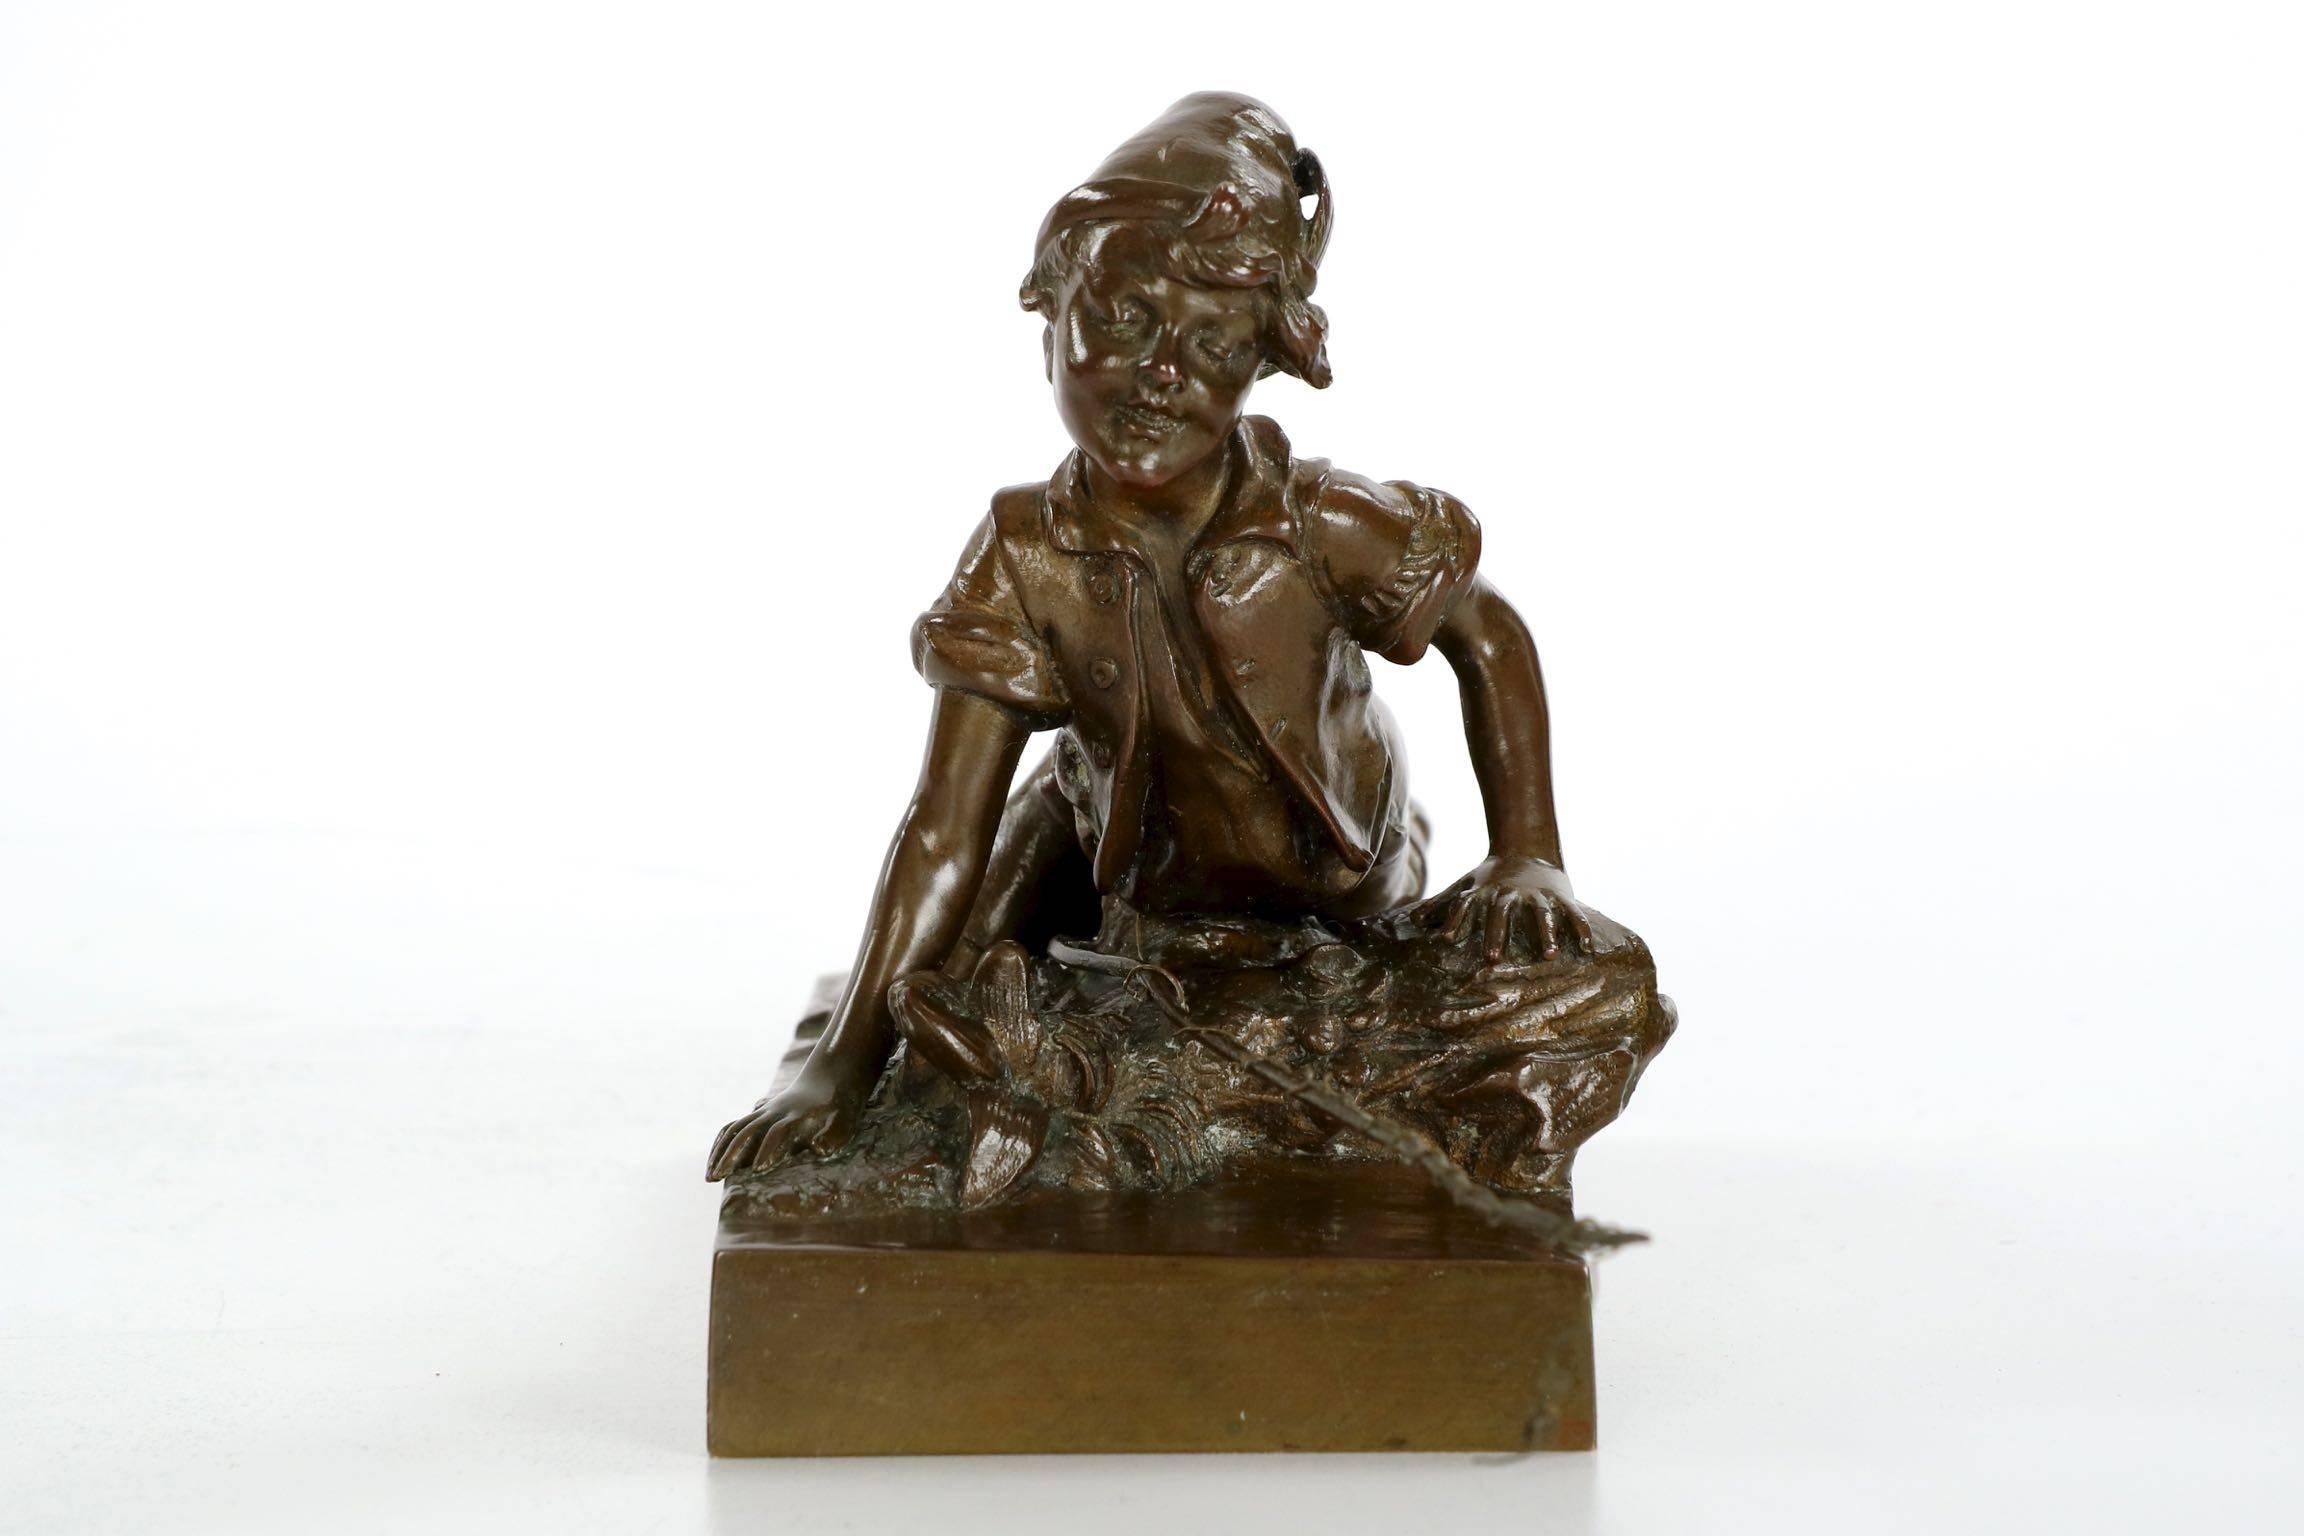 This fine Austrian antique bronze sculpture captures a young boy as he delightfully looks over the waters edge for fish. His home-fashioned fishing pole, a long branch with twine wrapped around the length, rests beneath him to be easily accessed